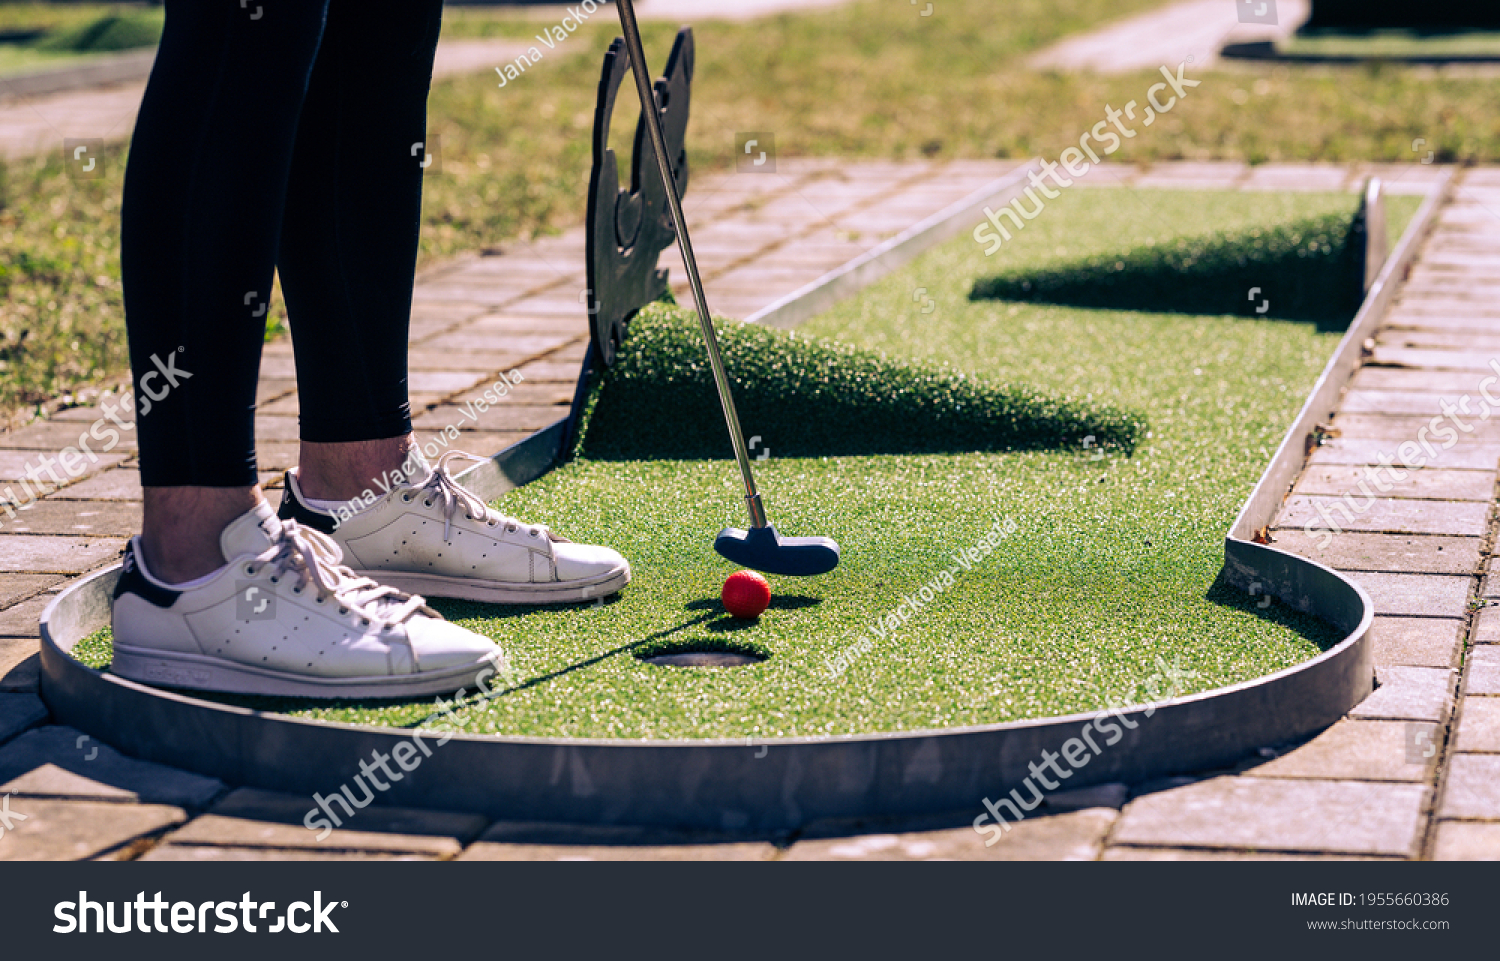 Minigolf player with white sneakers putting golf ball into the hole on bumpy green lane.  #1955660386